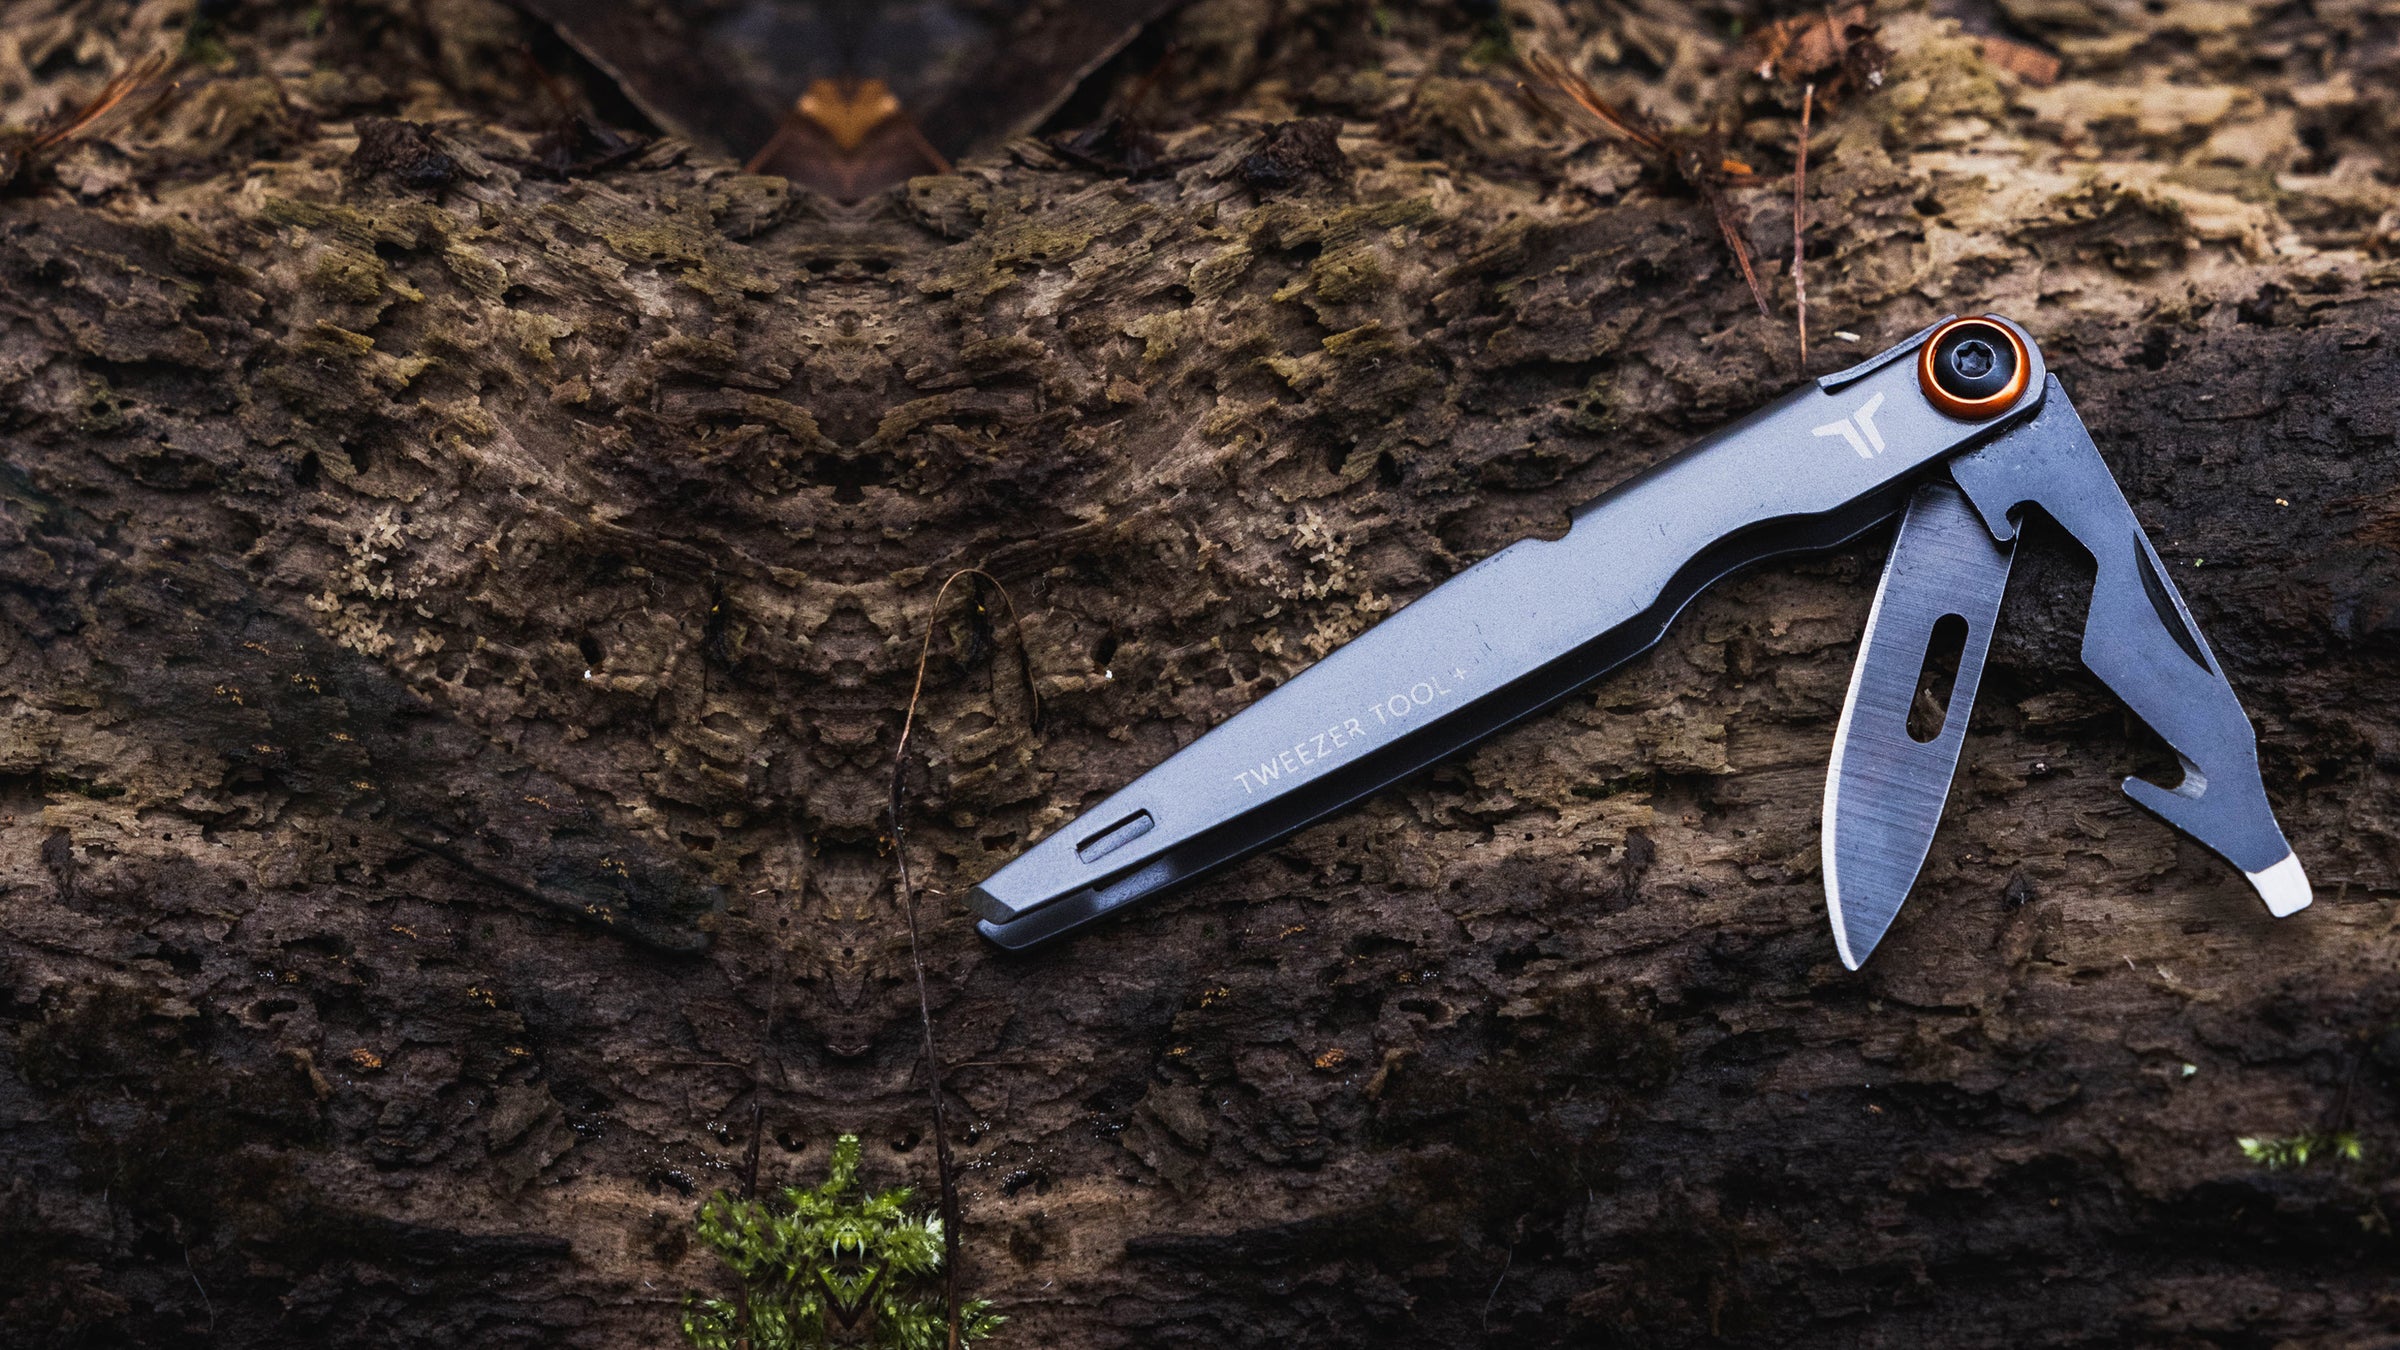 TRUE's Flipper Knife Combines Ease of Use and Reliable Performance